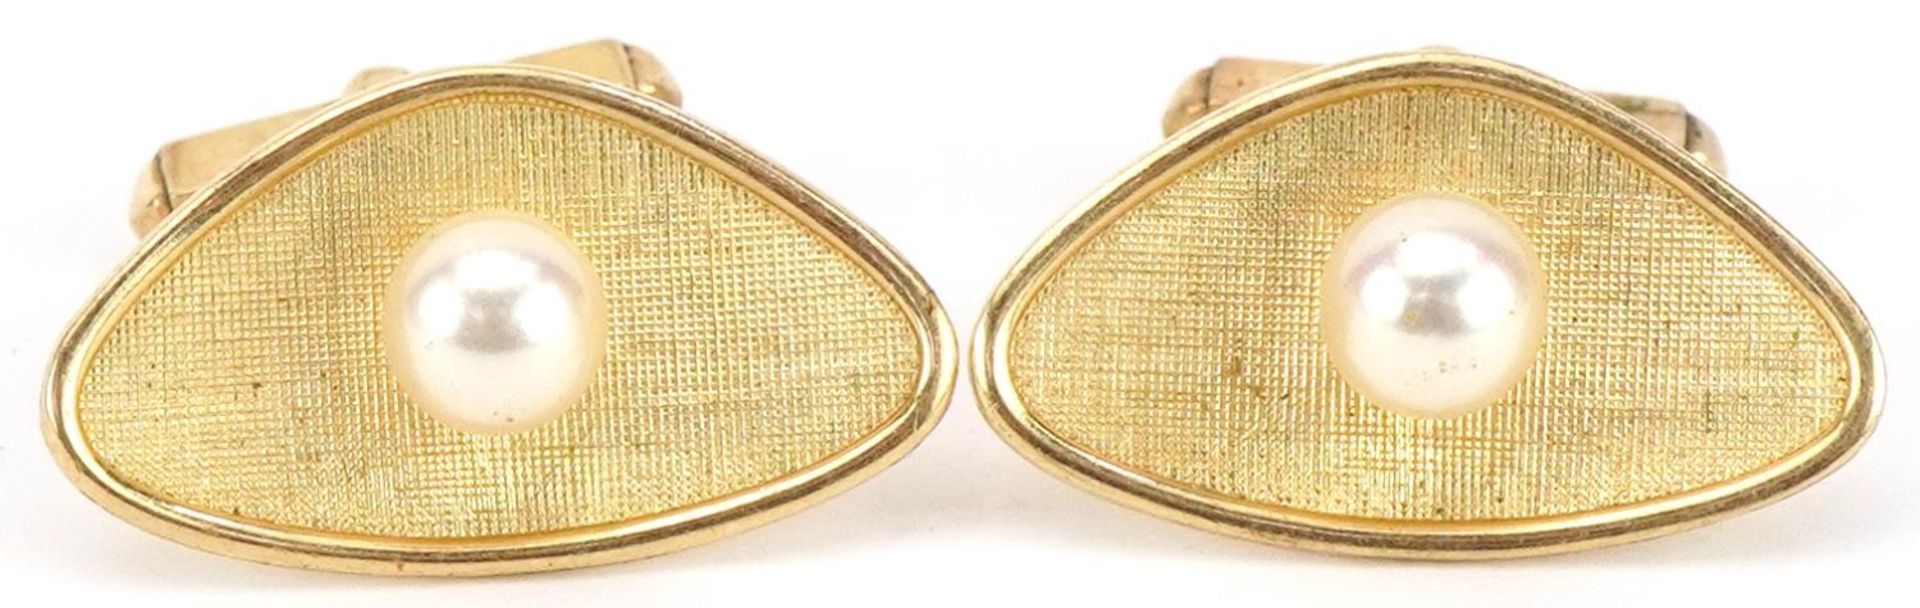 Mikimoto, pair of Japanese 14K gold Mikimoto pearl cufflinks, each 2.5cm wide, total 10.0g